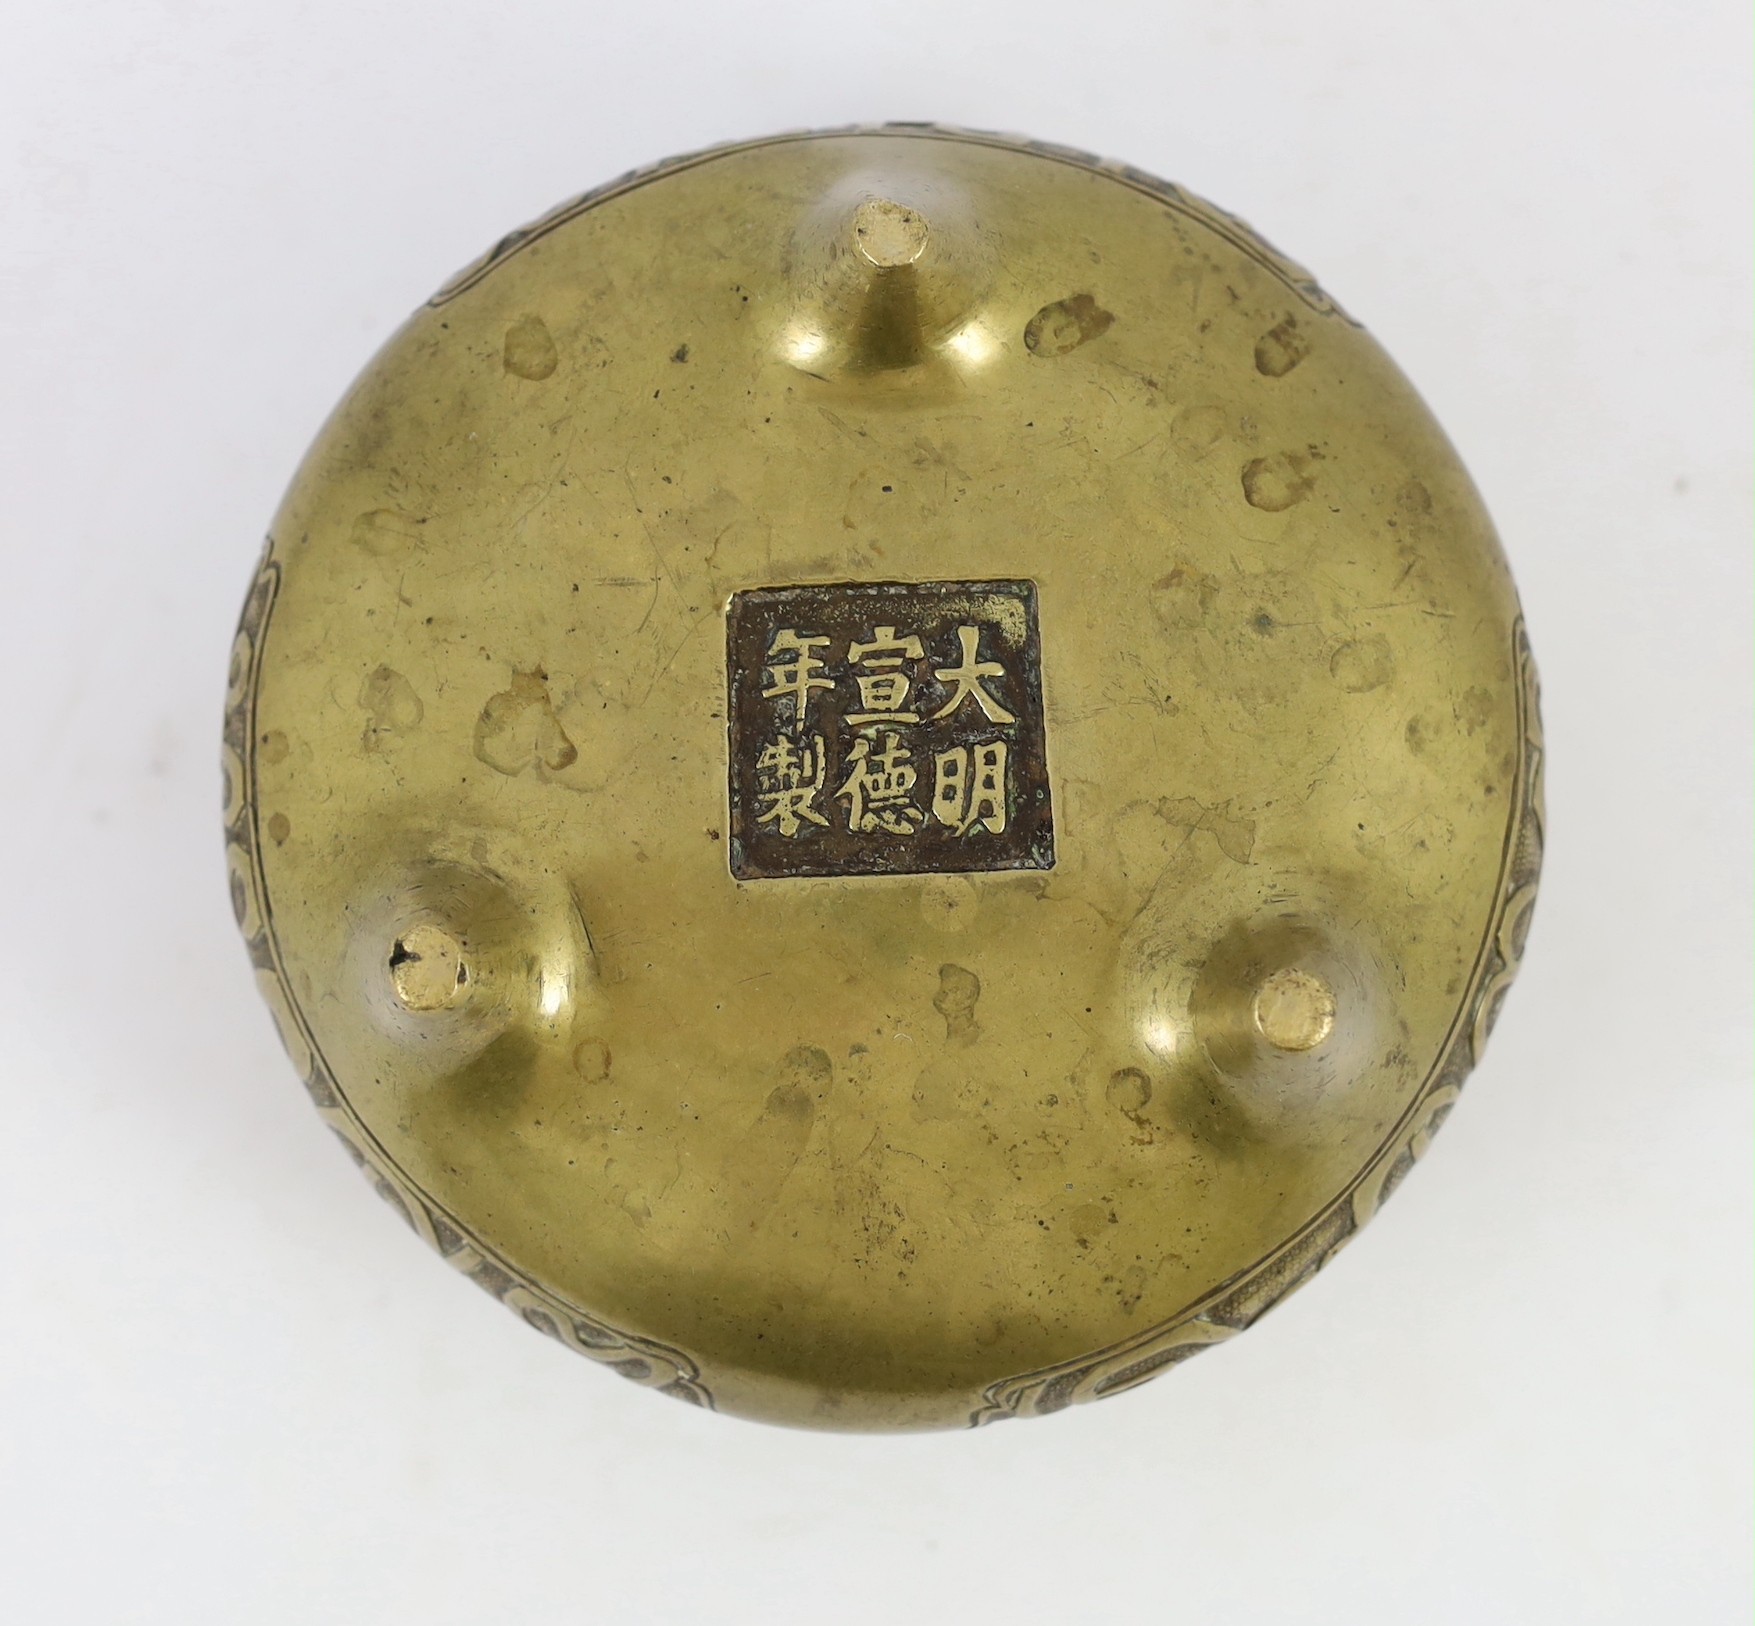 A Chinese bronze censer made for the Islamic market, ding, Xuande mark but 18th/19th century, 14.5cm wide